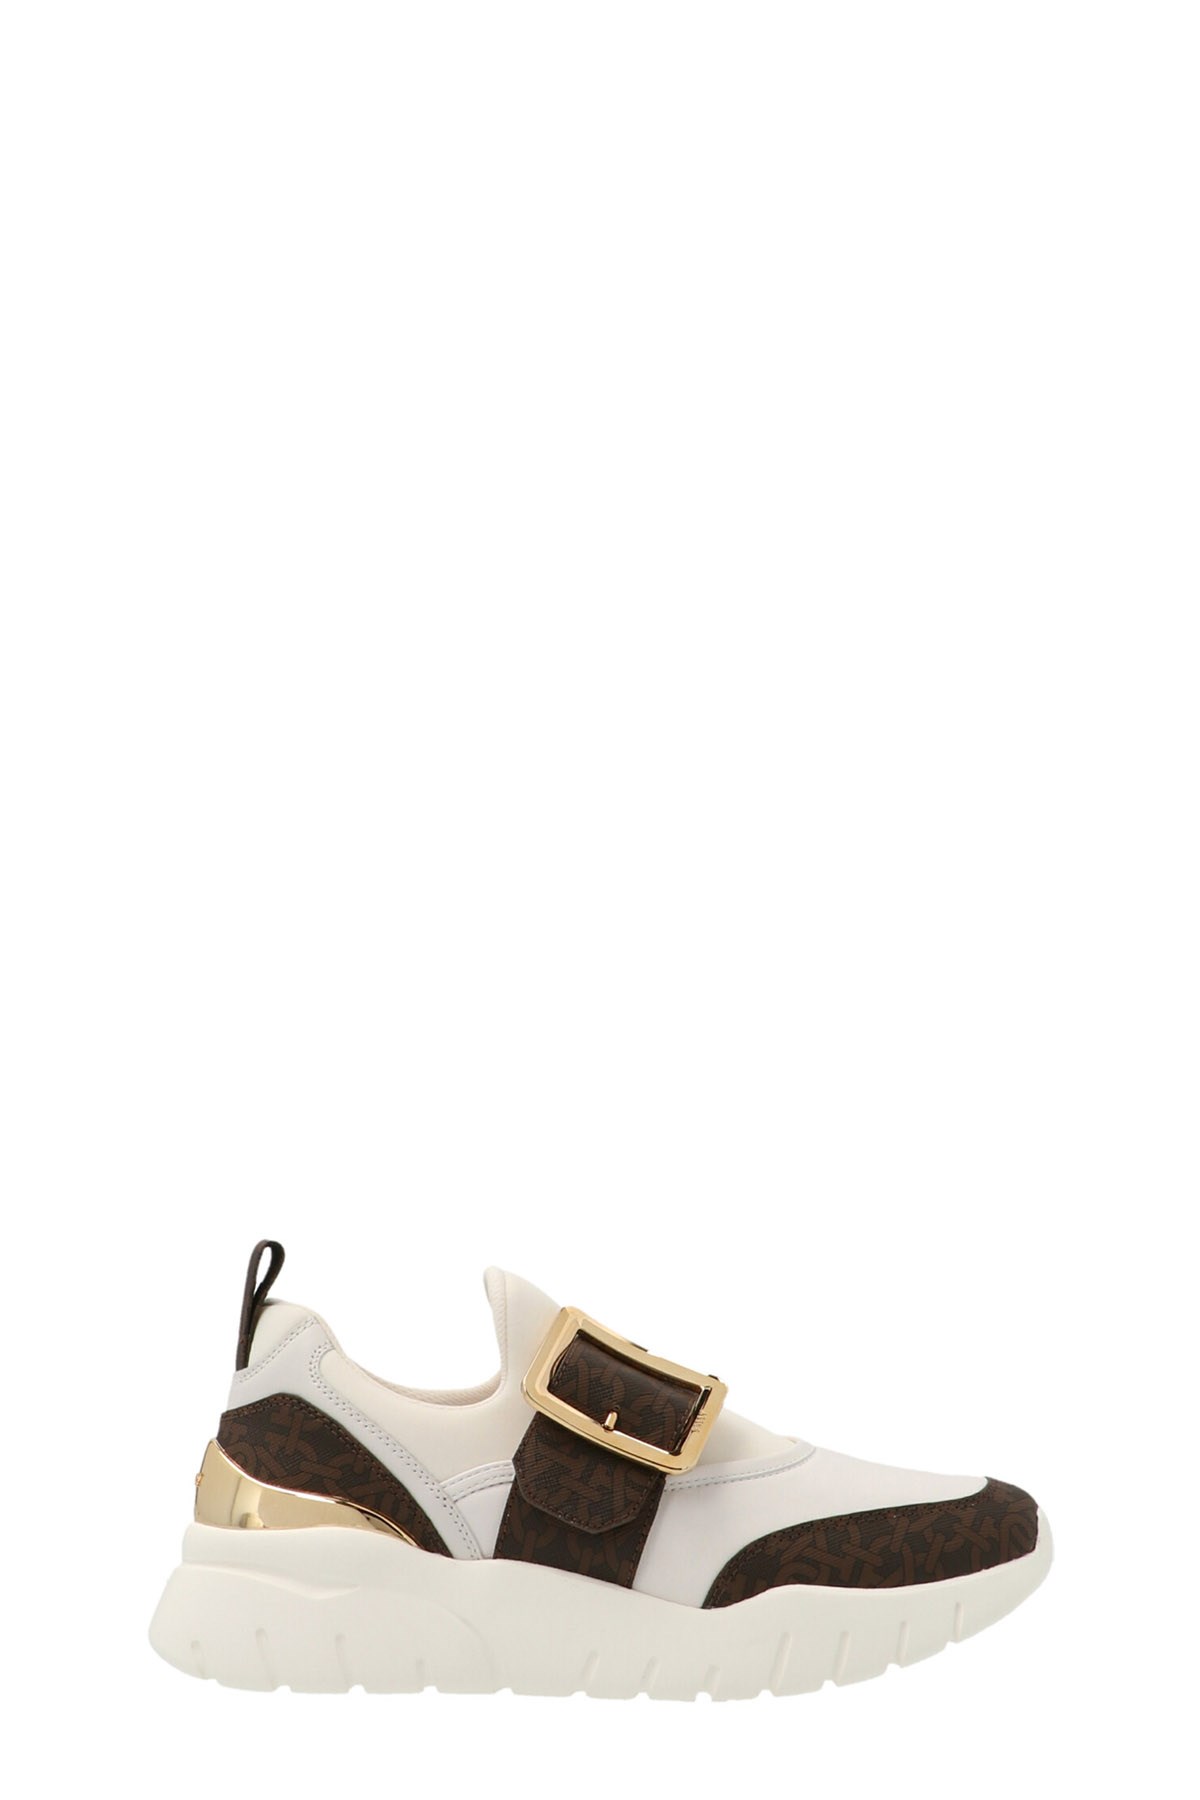 BALLY 'Brinelle 20’ Sneakers